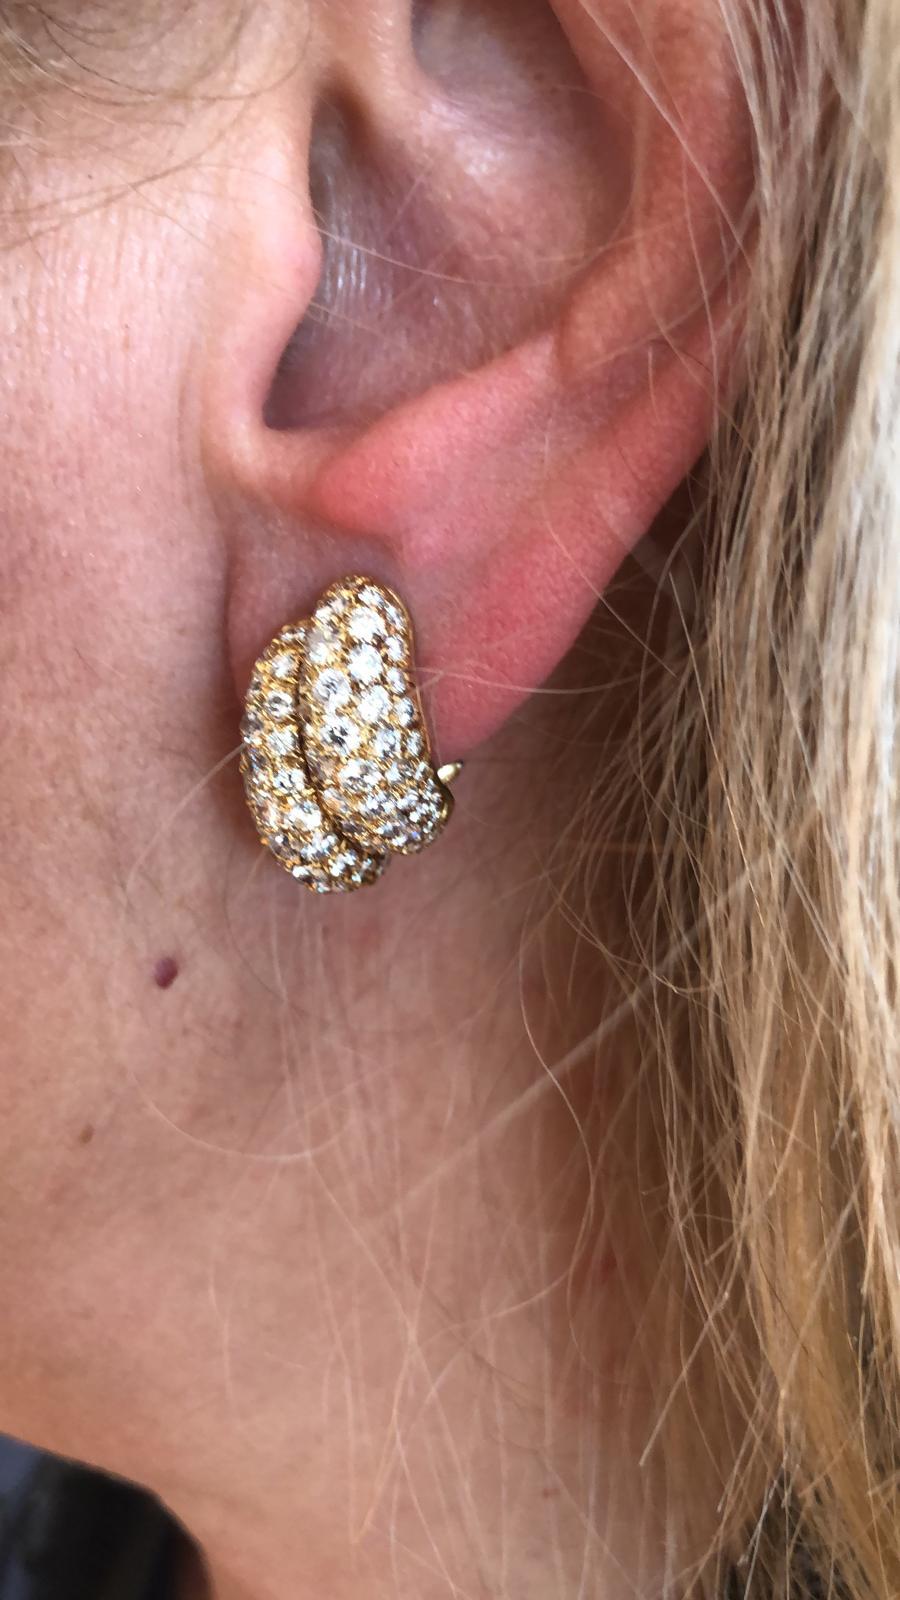 Van Cleef & Arpels Vintage Collection Diamond Gold Boulle Double Earrings
18k yellow gold diamond Boulle ear clips, signed Van Cleef & Arpels.
dimensions approx. 3/4